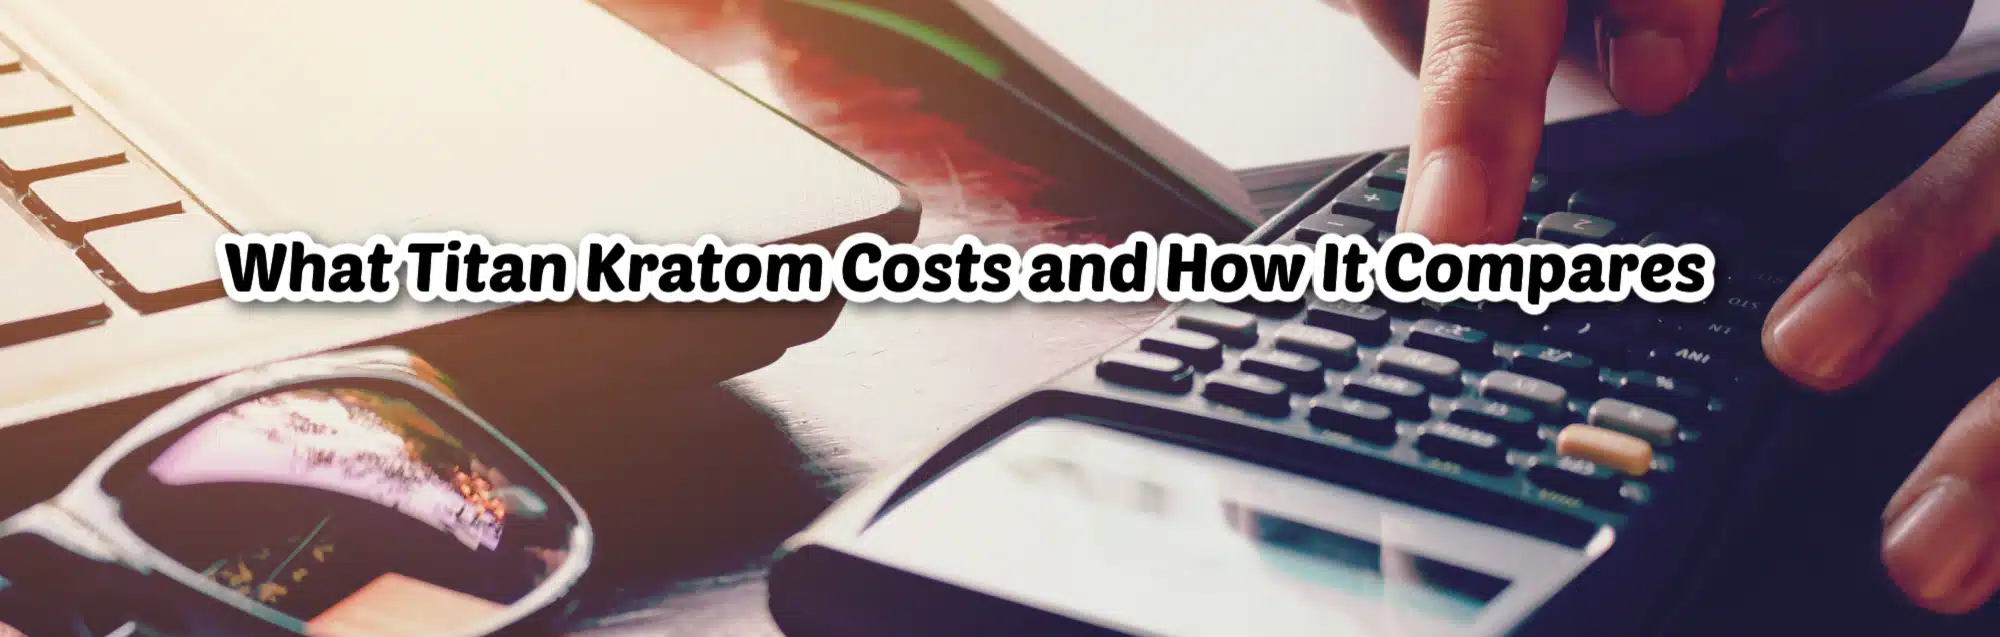 image of what titan kratom costs and how it compares